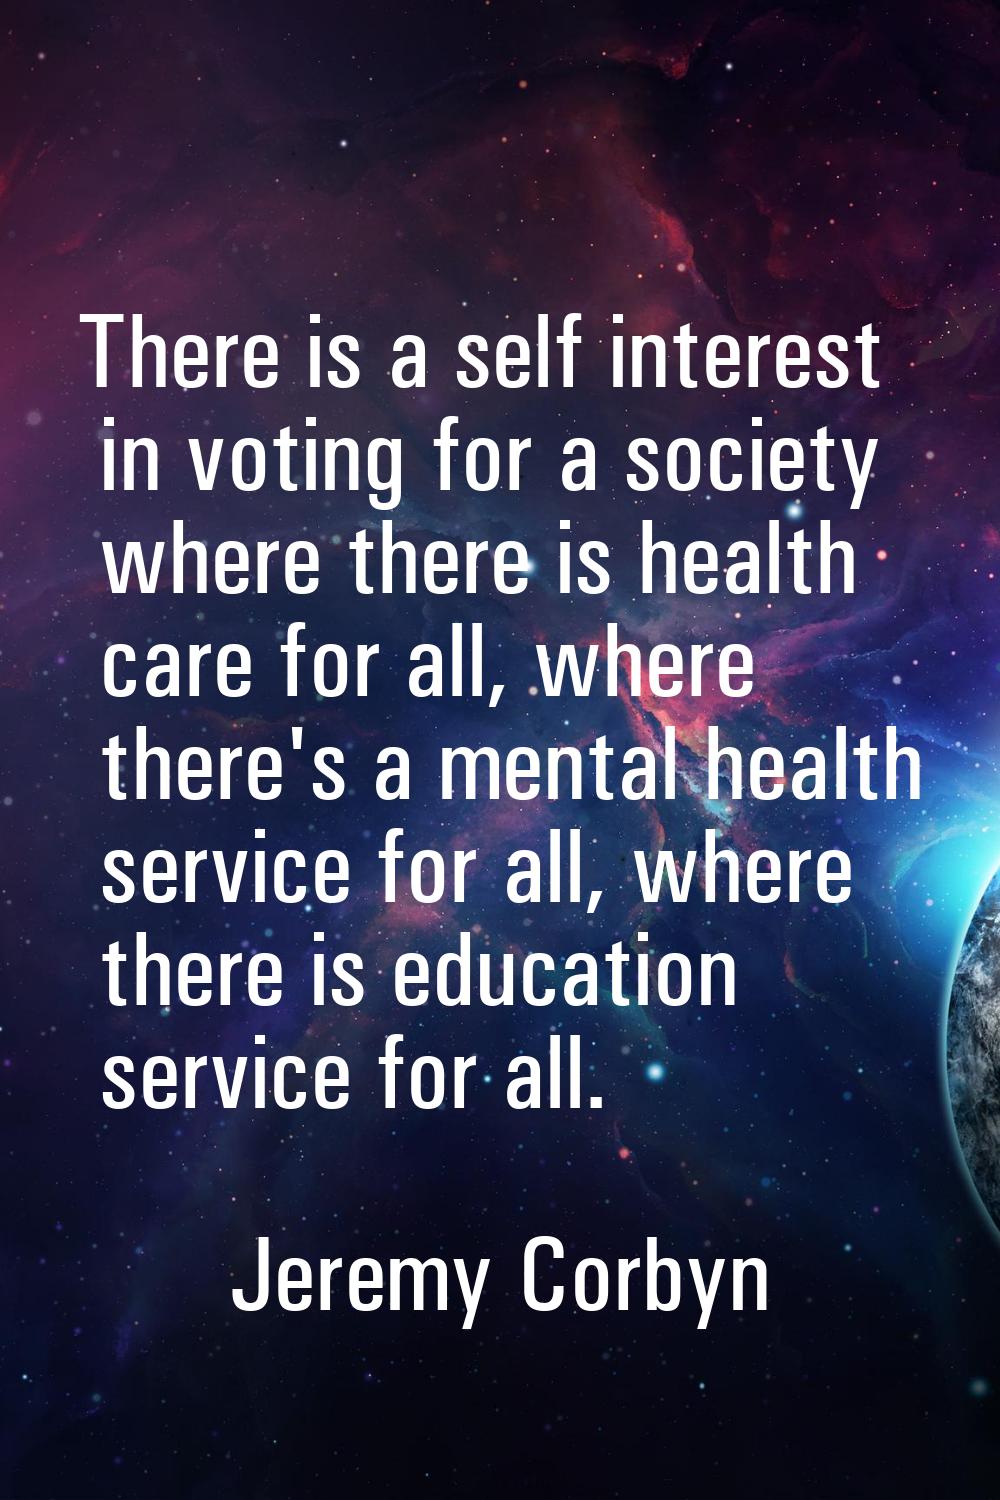 There is a self interest in voting for a society where there is health care for all, where there's 